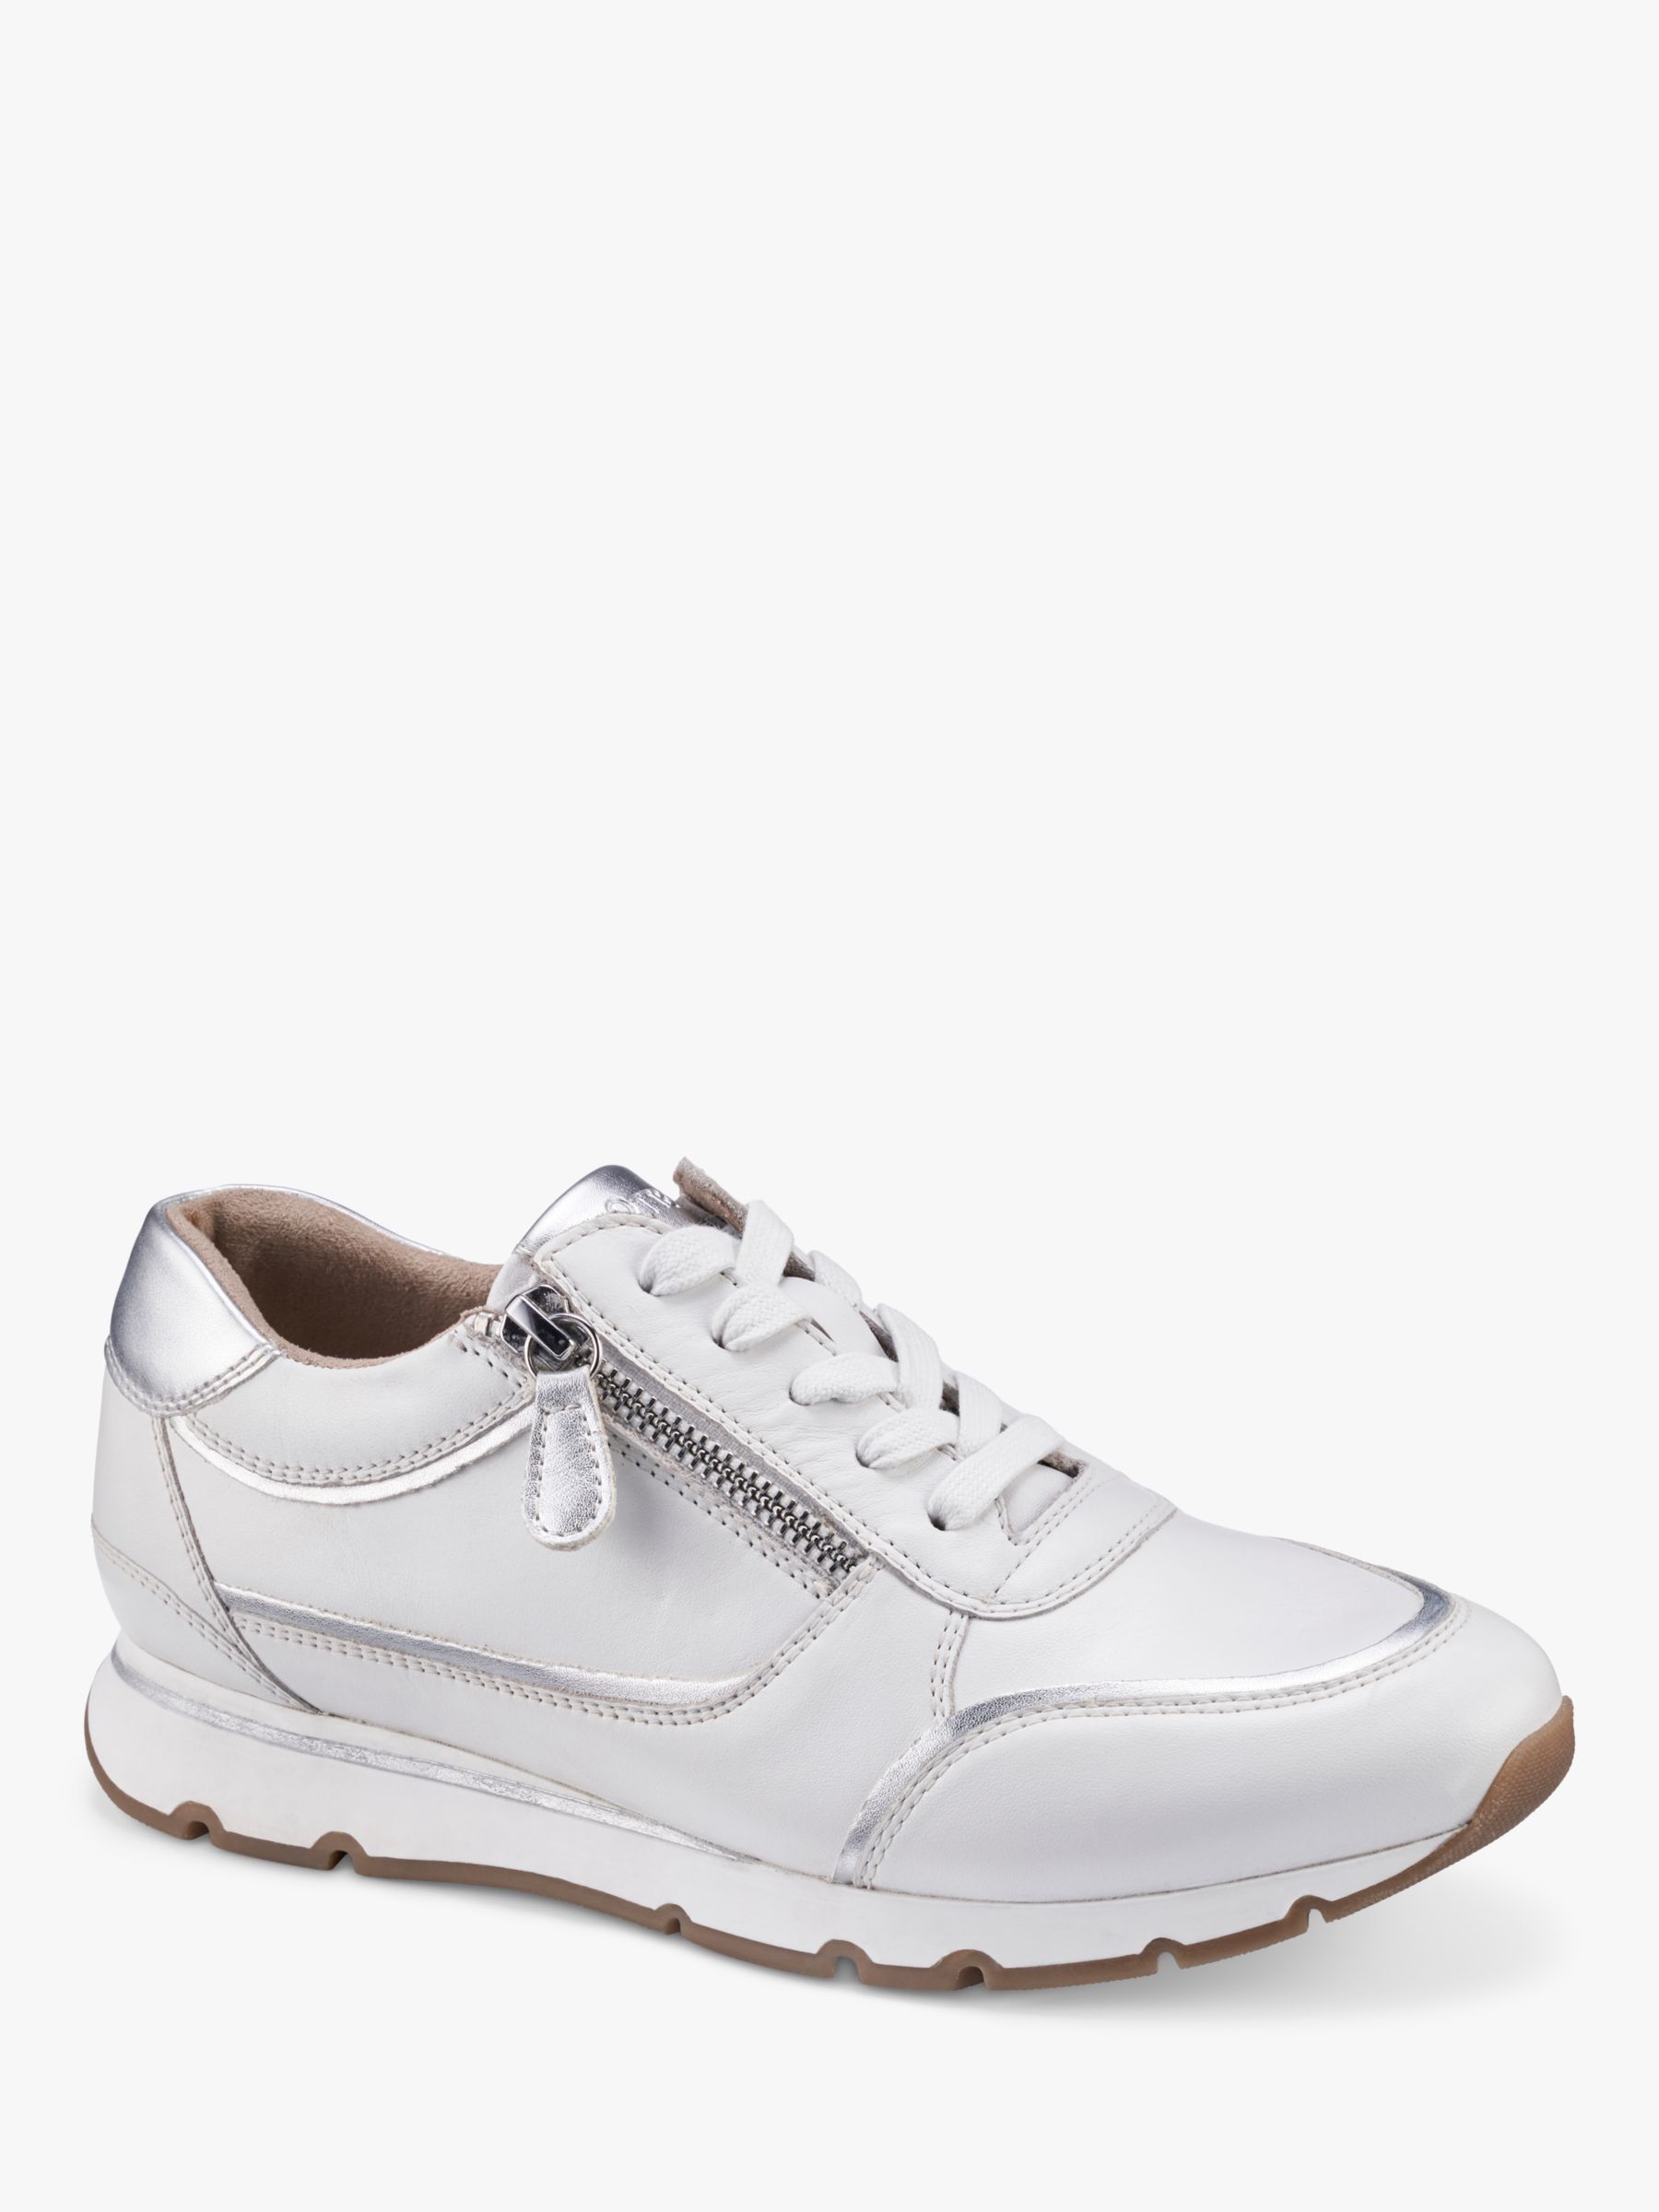 Buy Hotter Aspect Double Zip Trainers Online at johnlewis.com